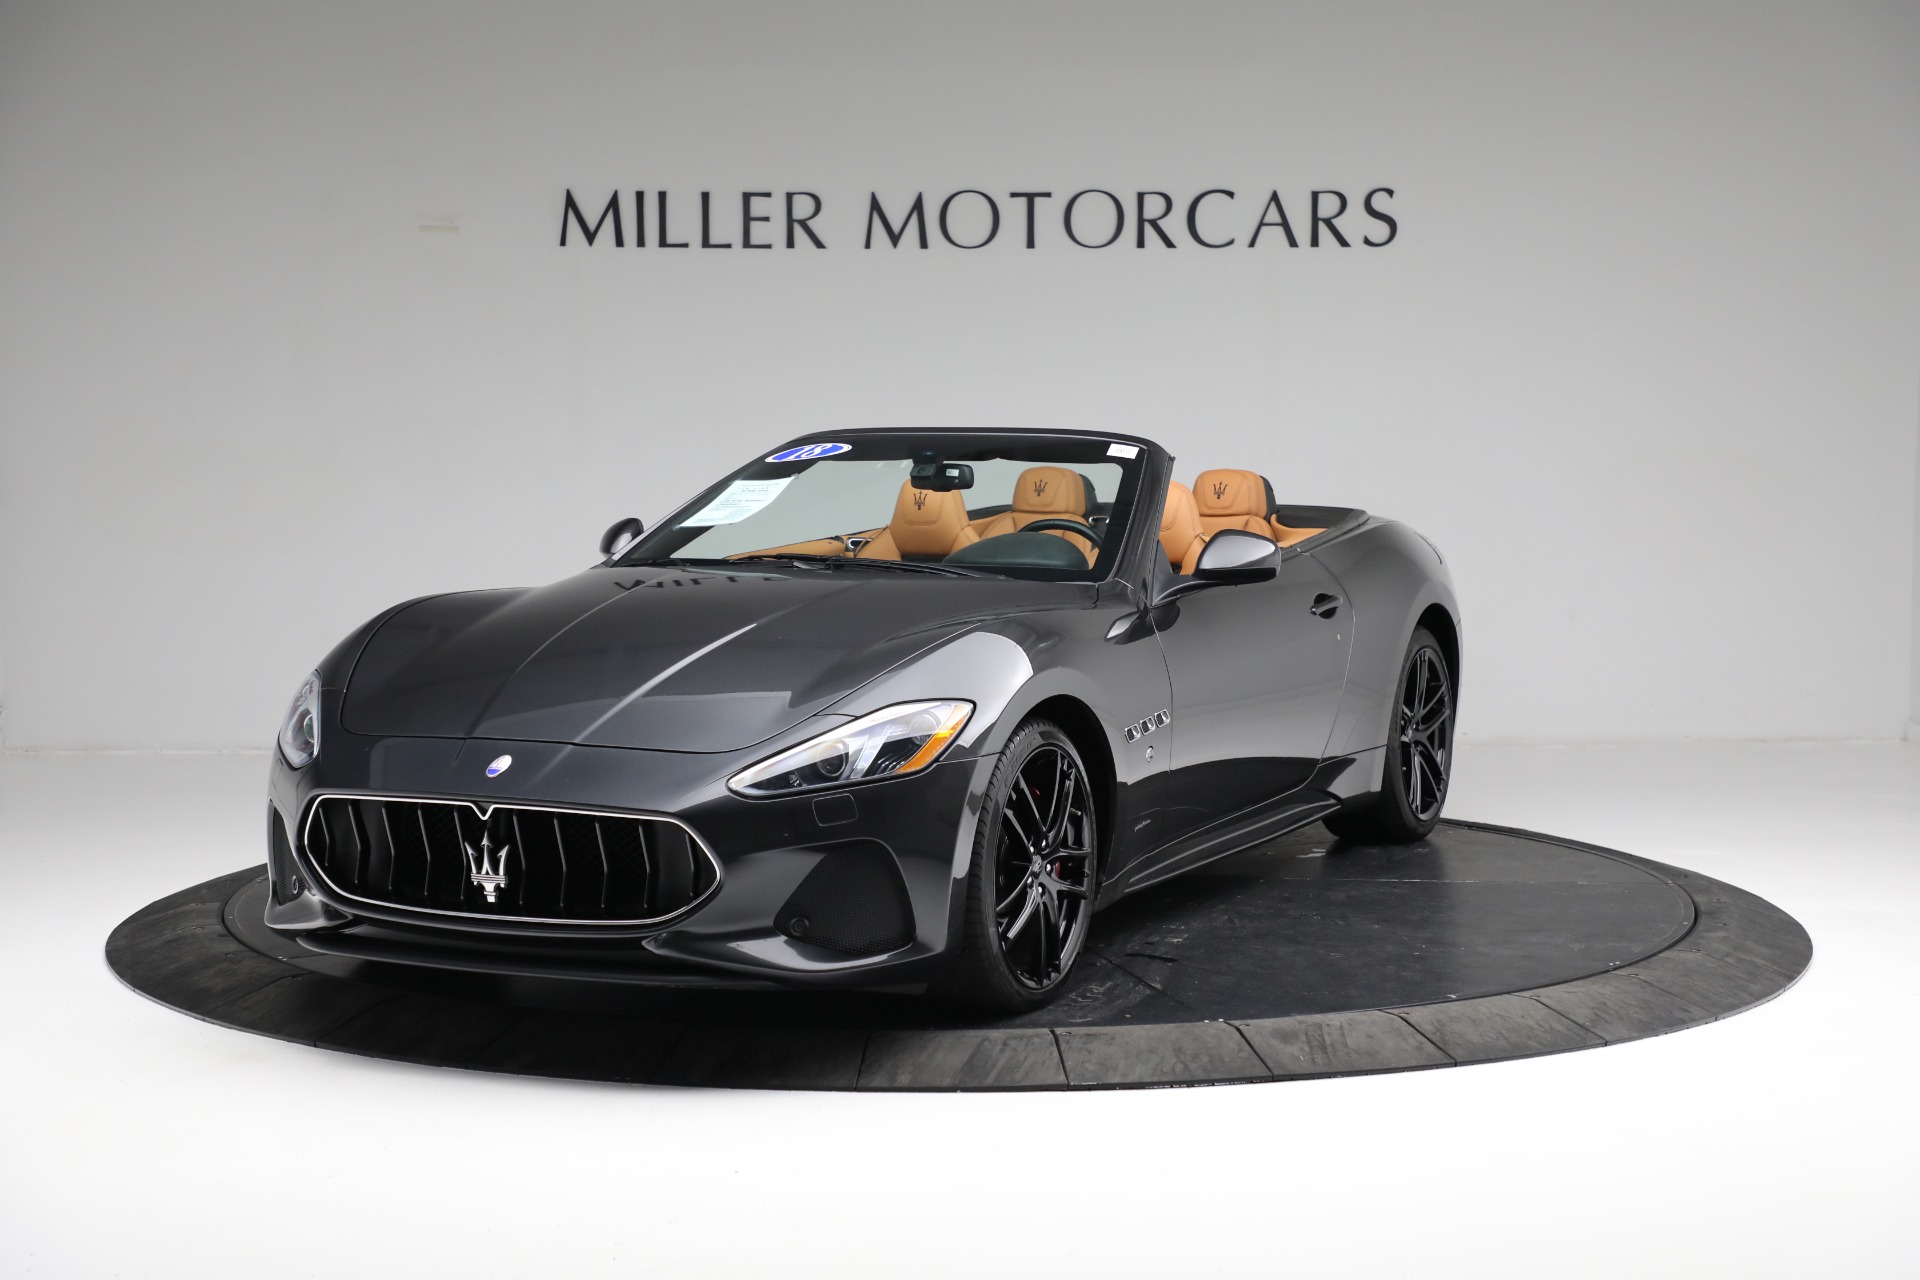 Used 2018 Maserati GranTurismo Sport Convertible for sale Sold at Bentley Greenwich in Greenwich CT 06830 1